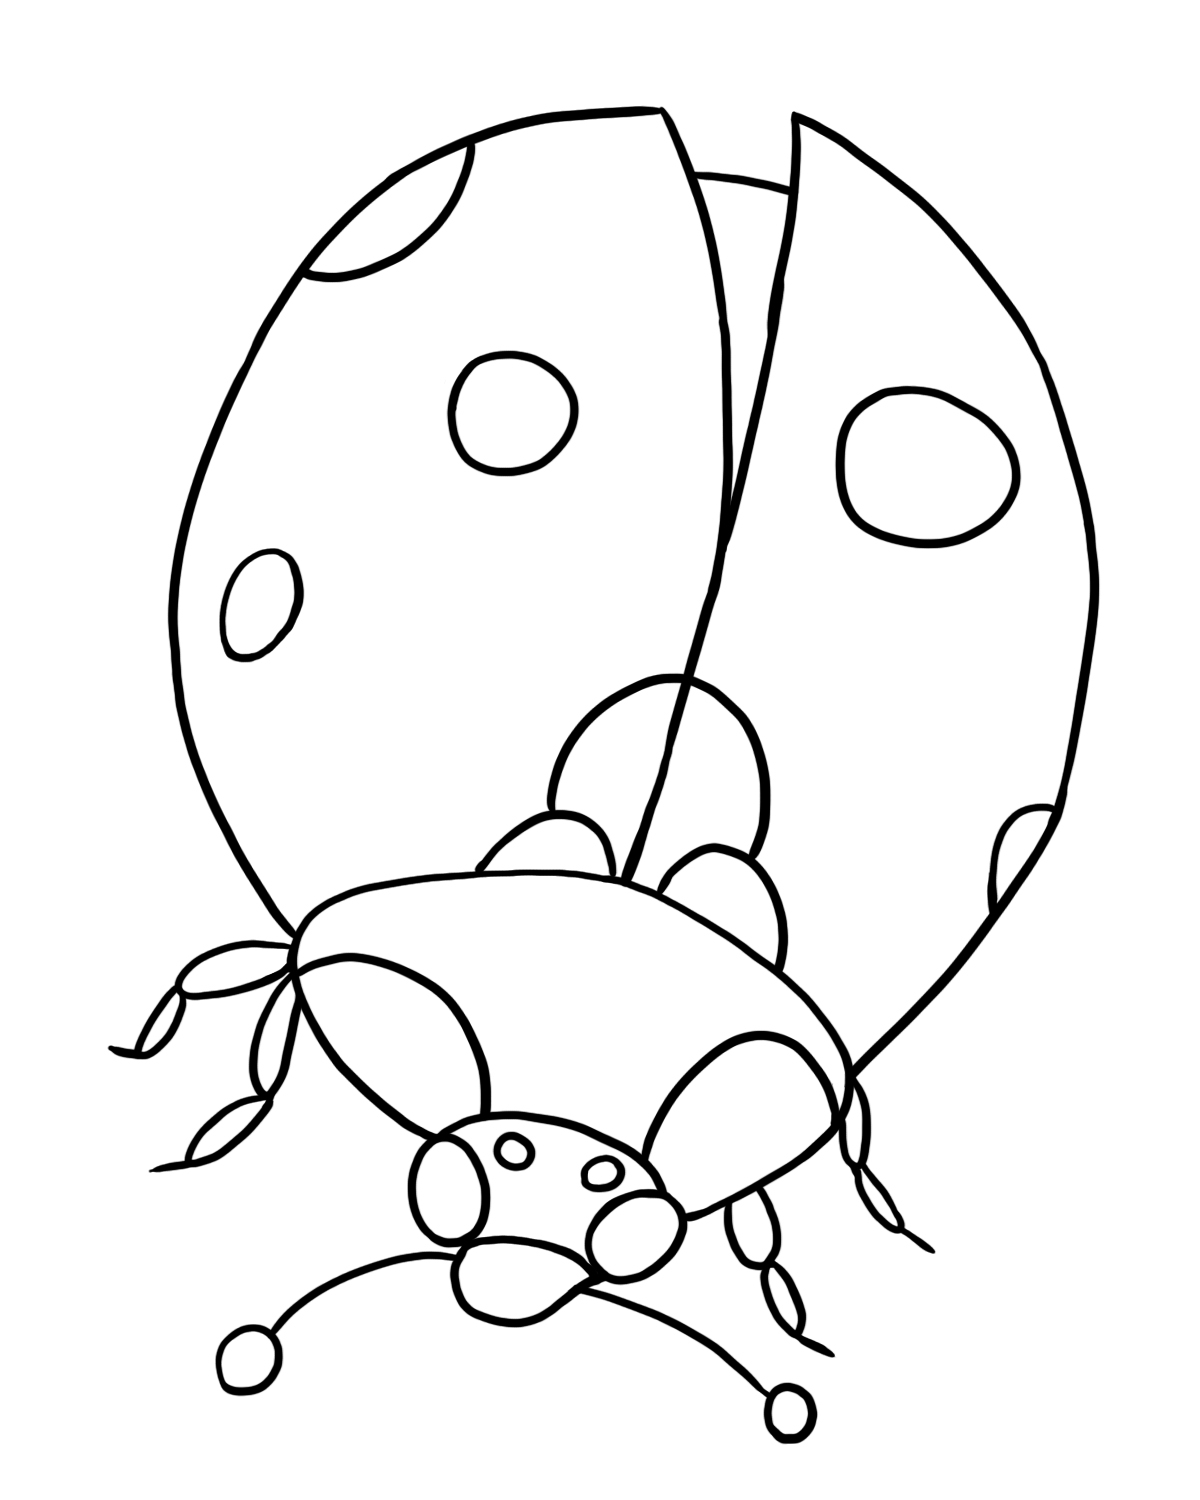 FREE Ladybug Coloring Pages to Print Out and Color!